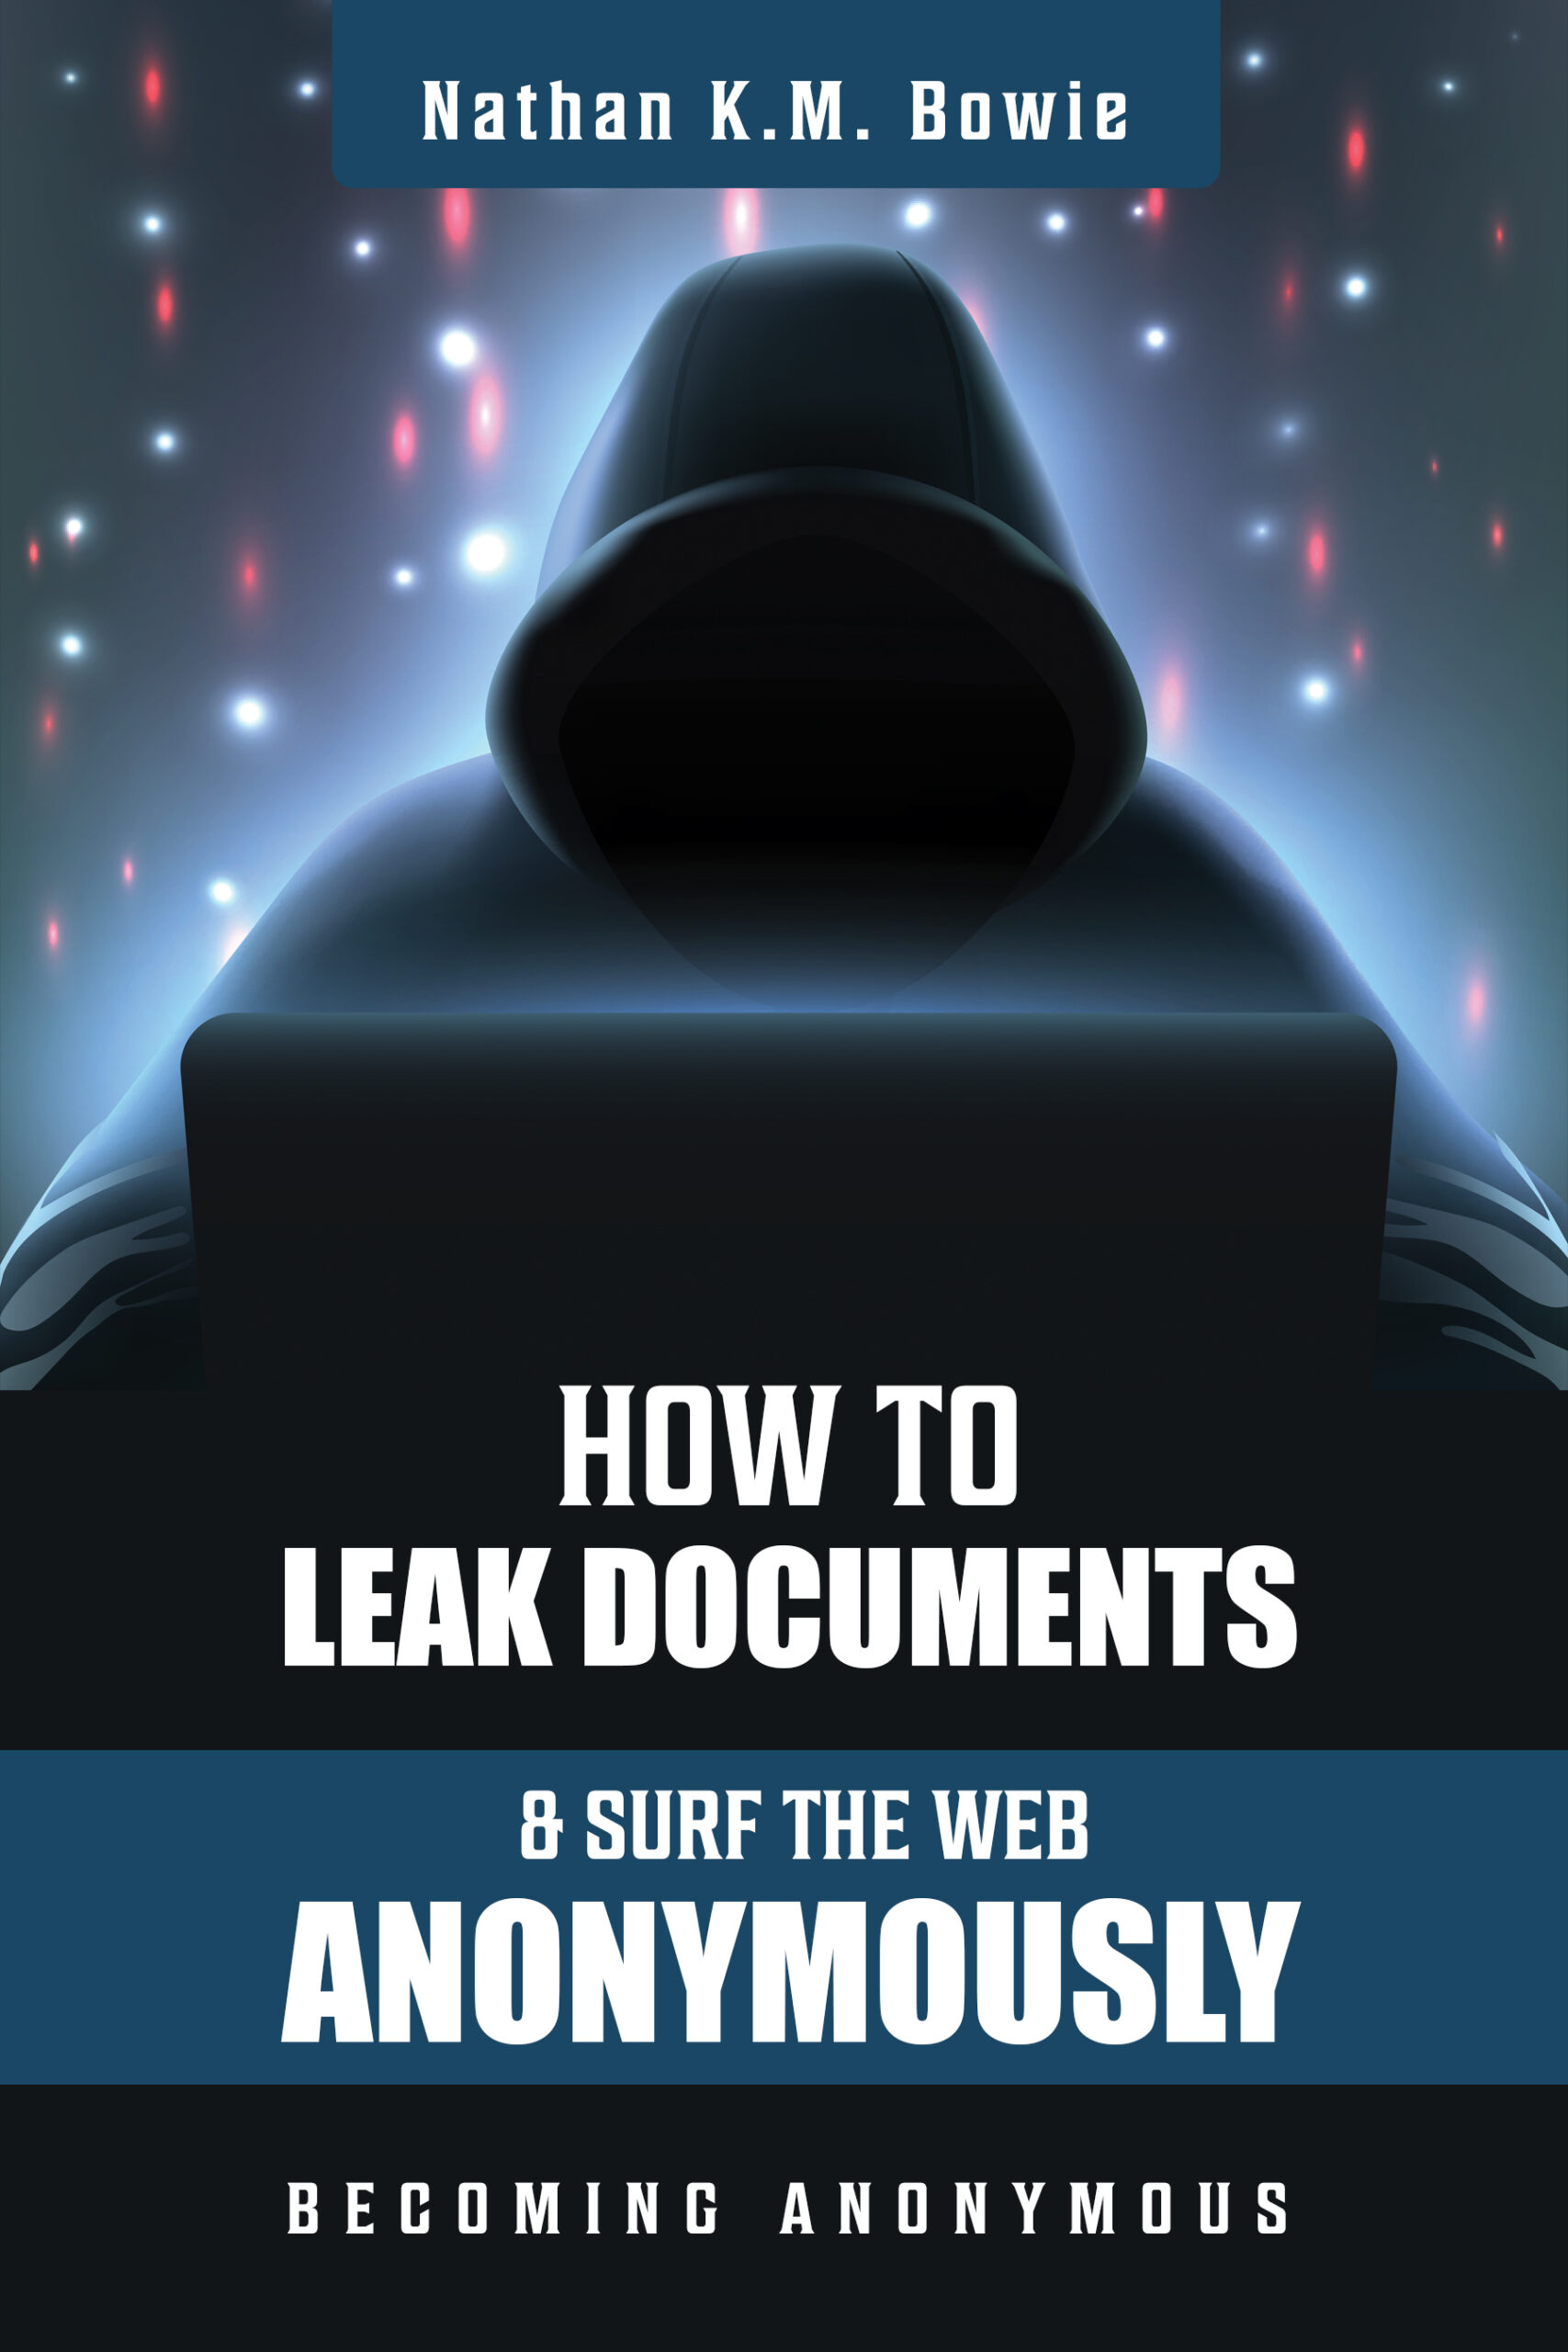 FREE: How to Leak Documents and Surf the Web Anonymously by Nathan KM Bowie